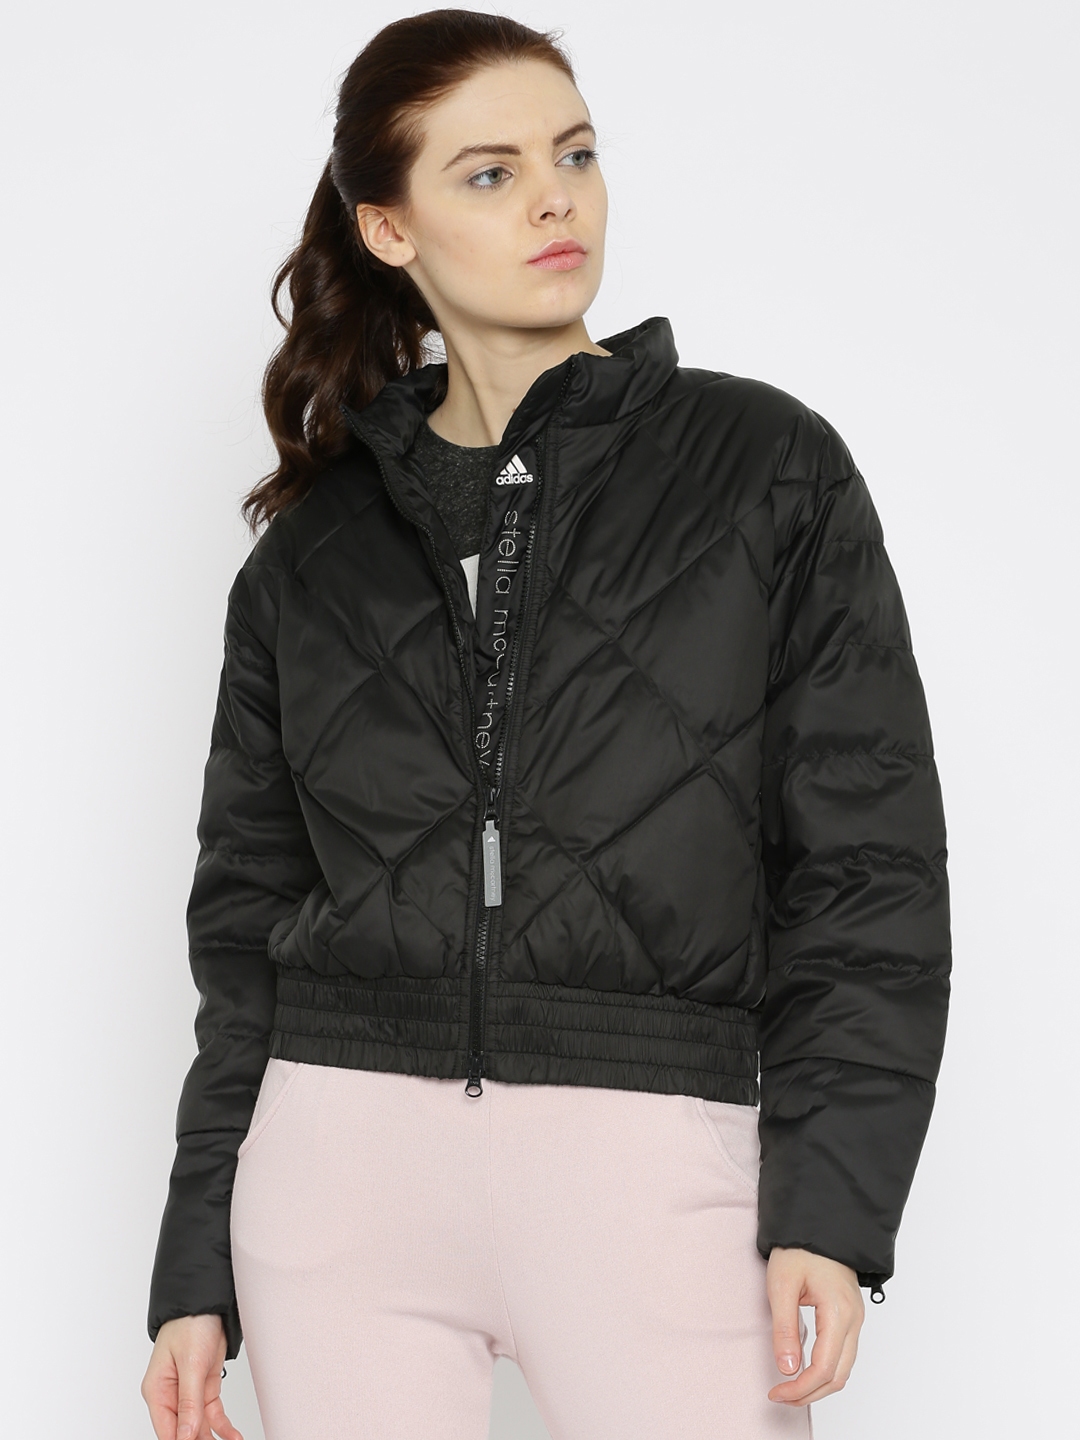 Buy ADIDAS Black Quilted Jacket - Jackets for Women 1585419 | Myntra